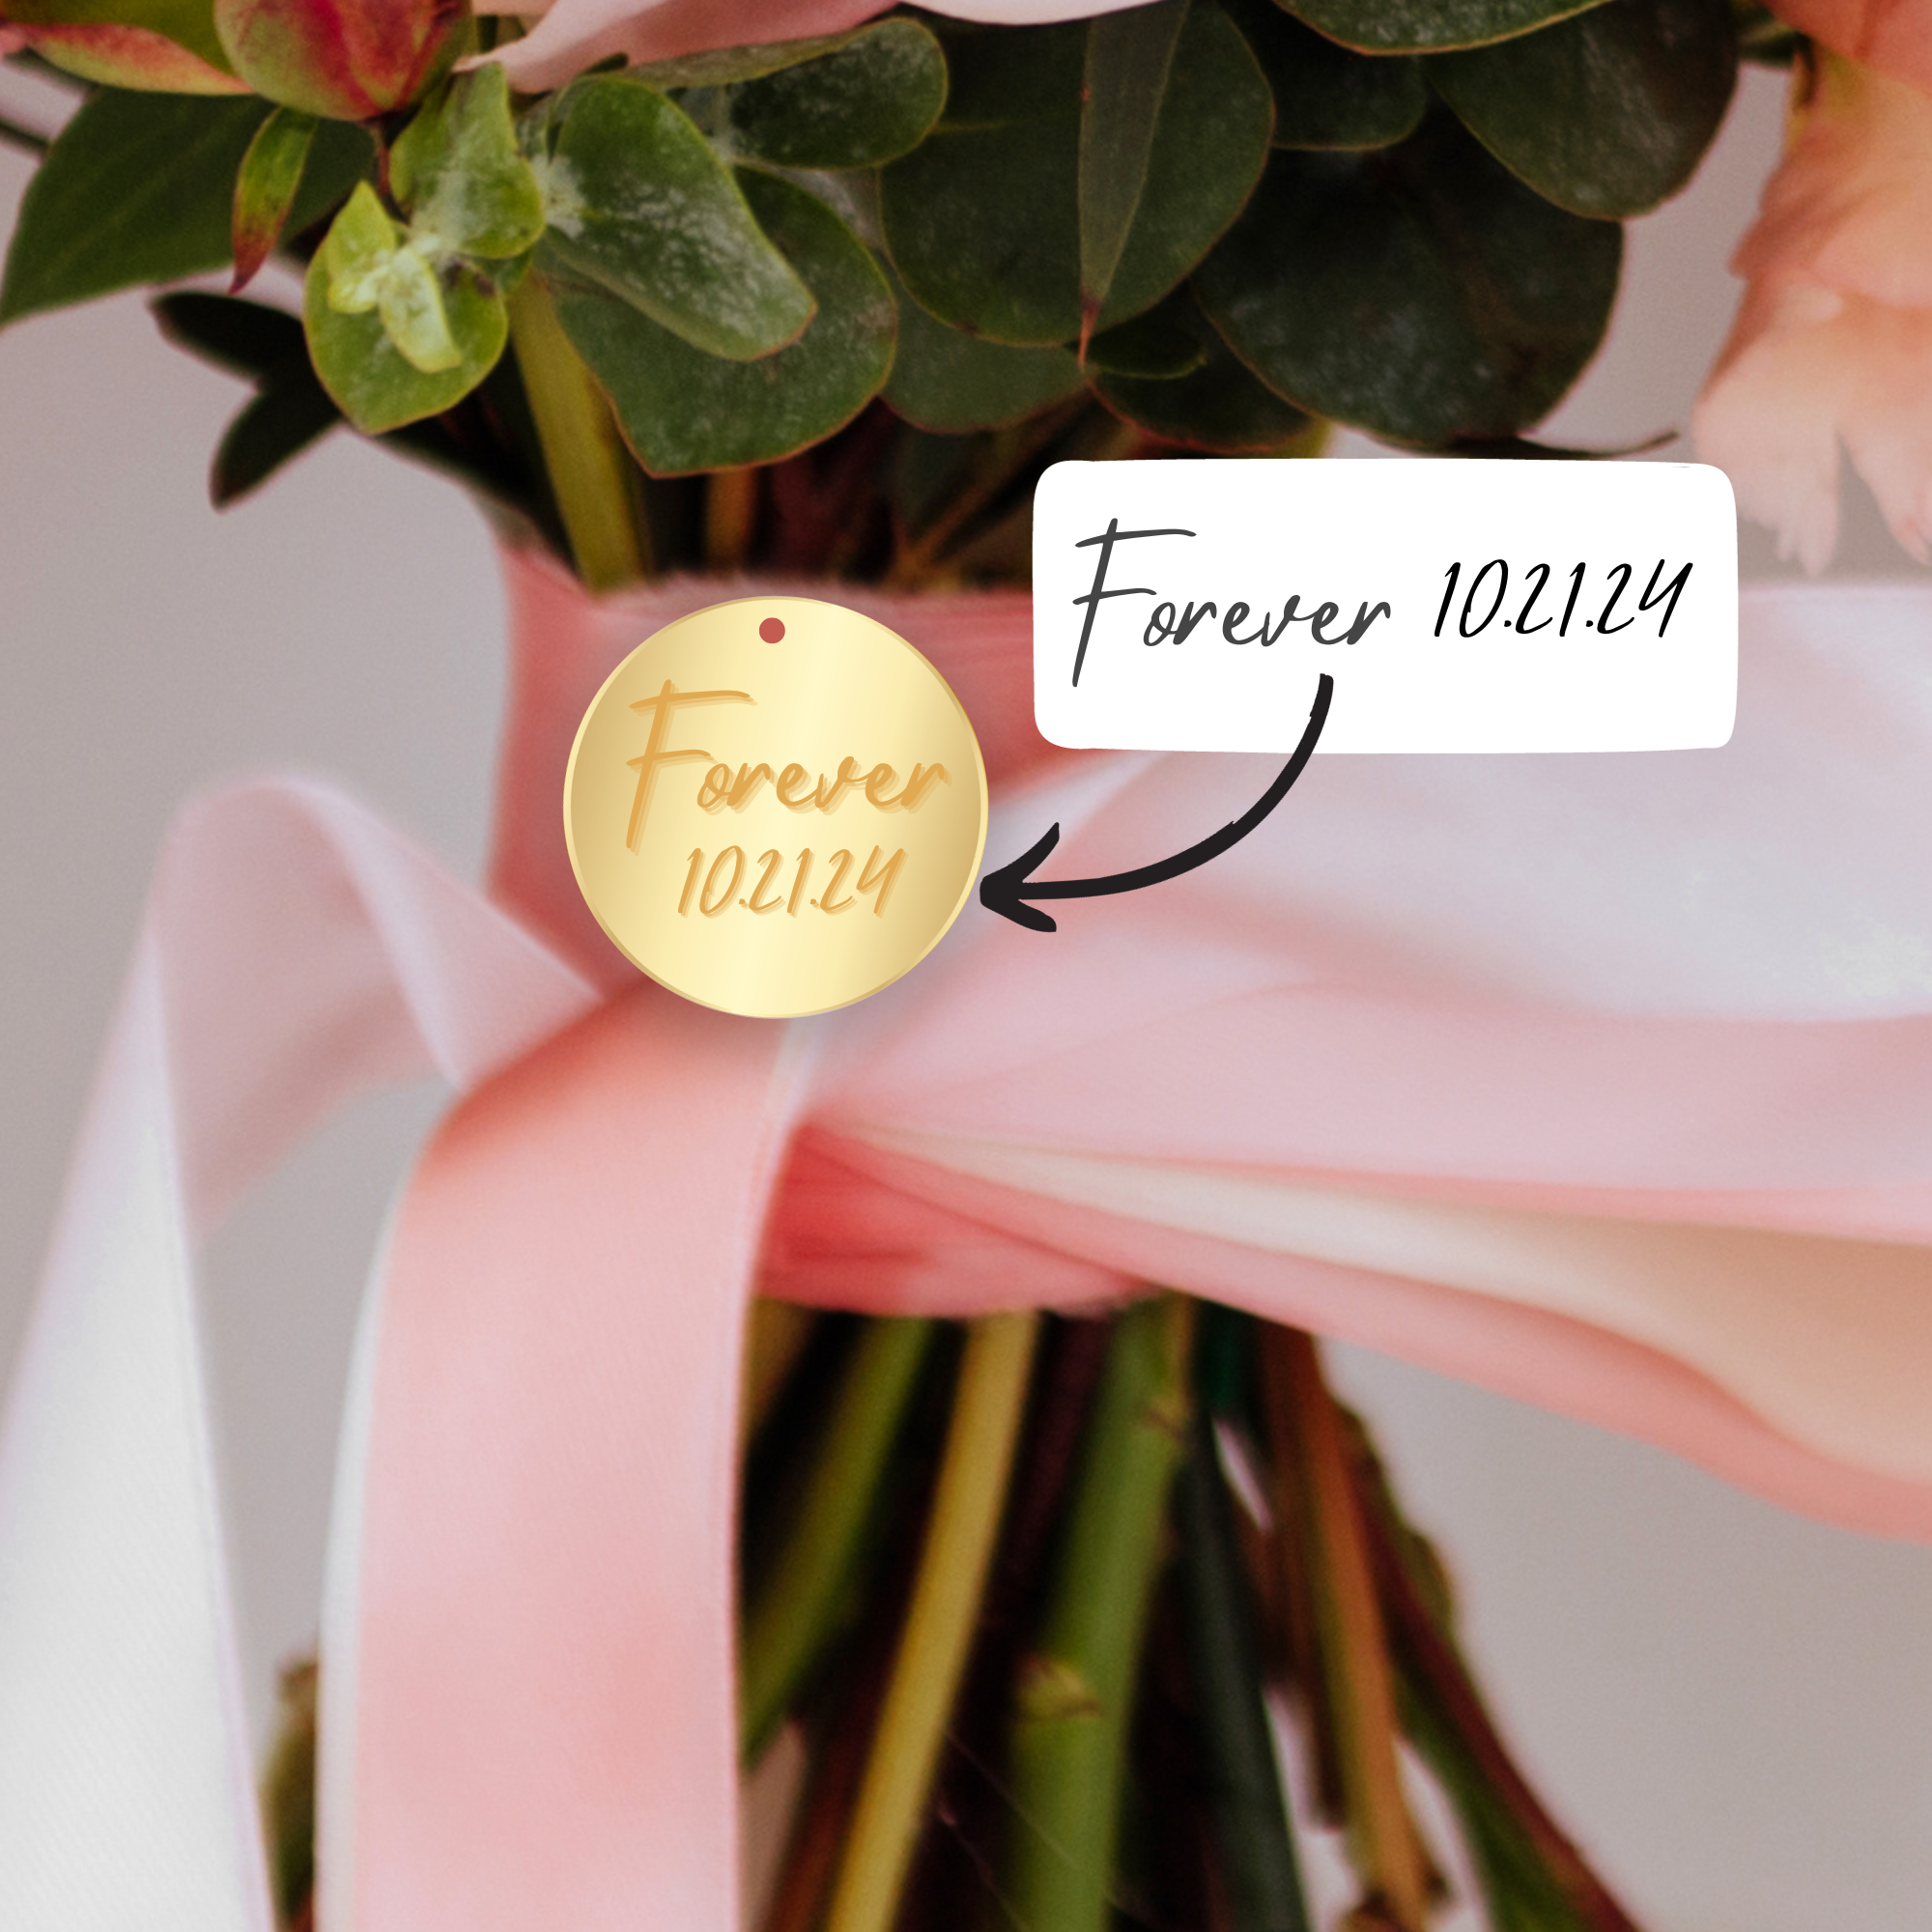 A bouquet with a gold circular charm that says 